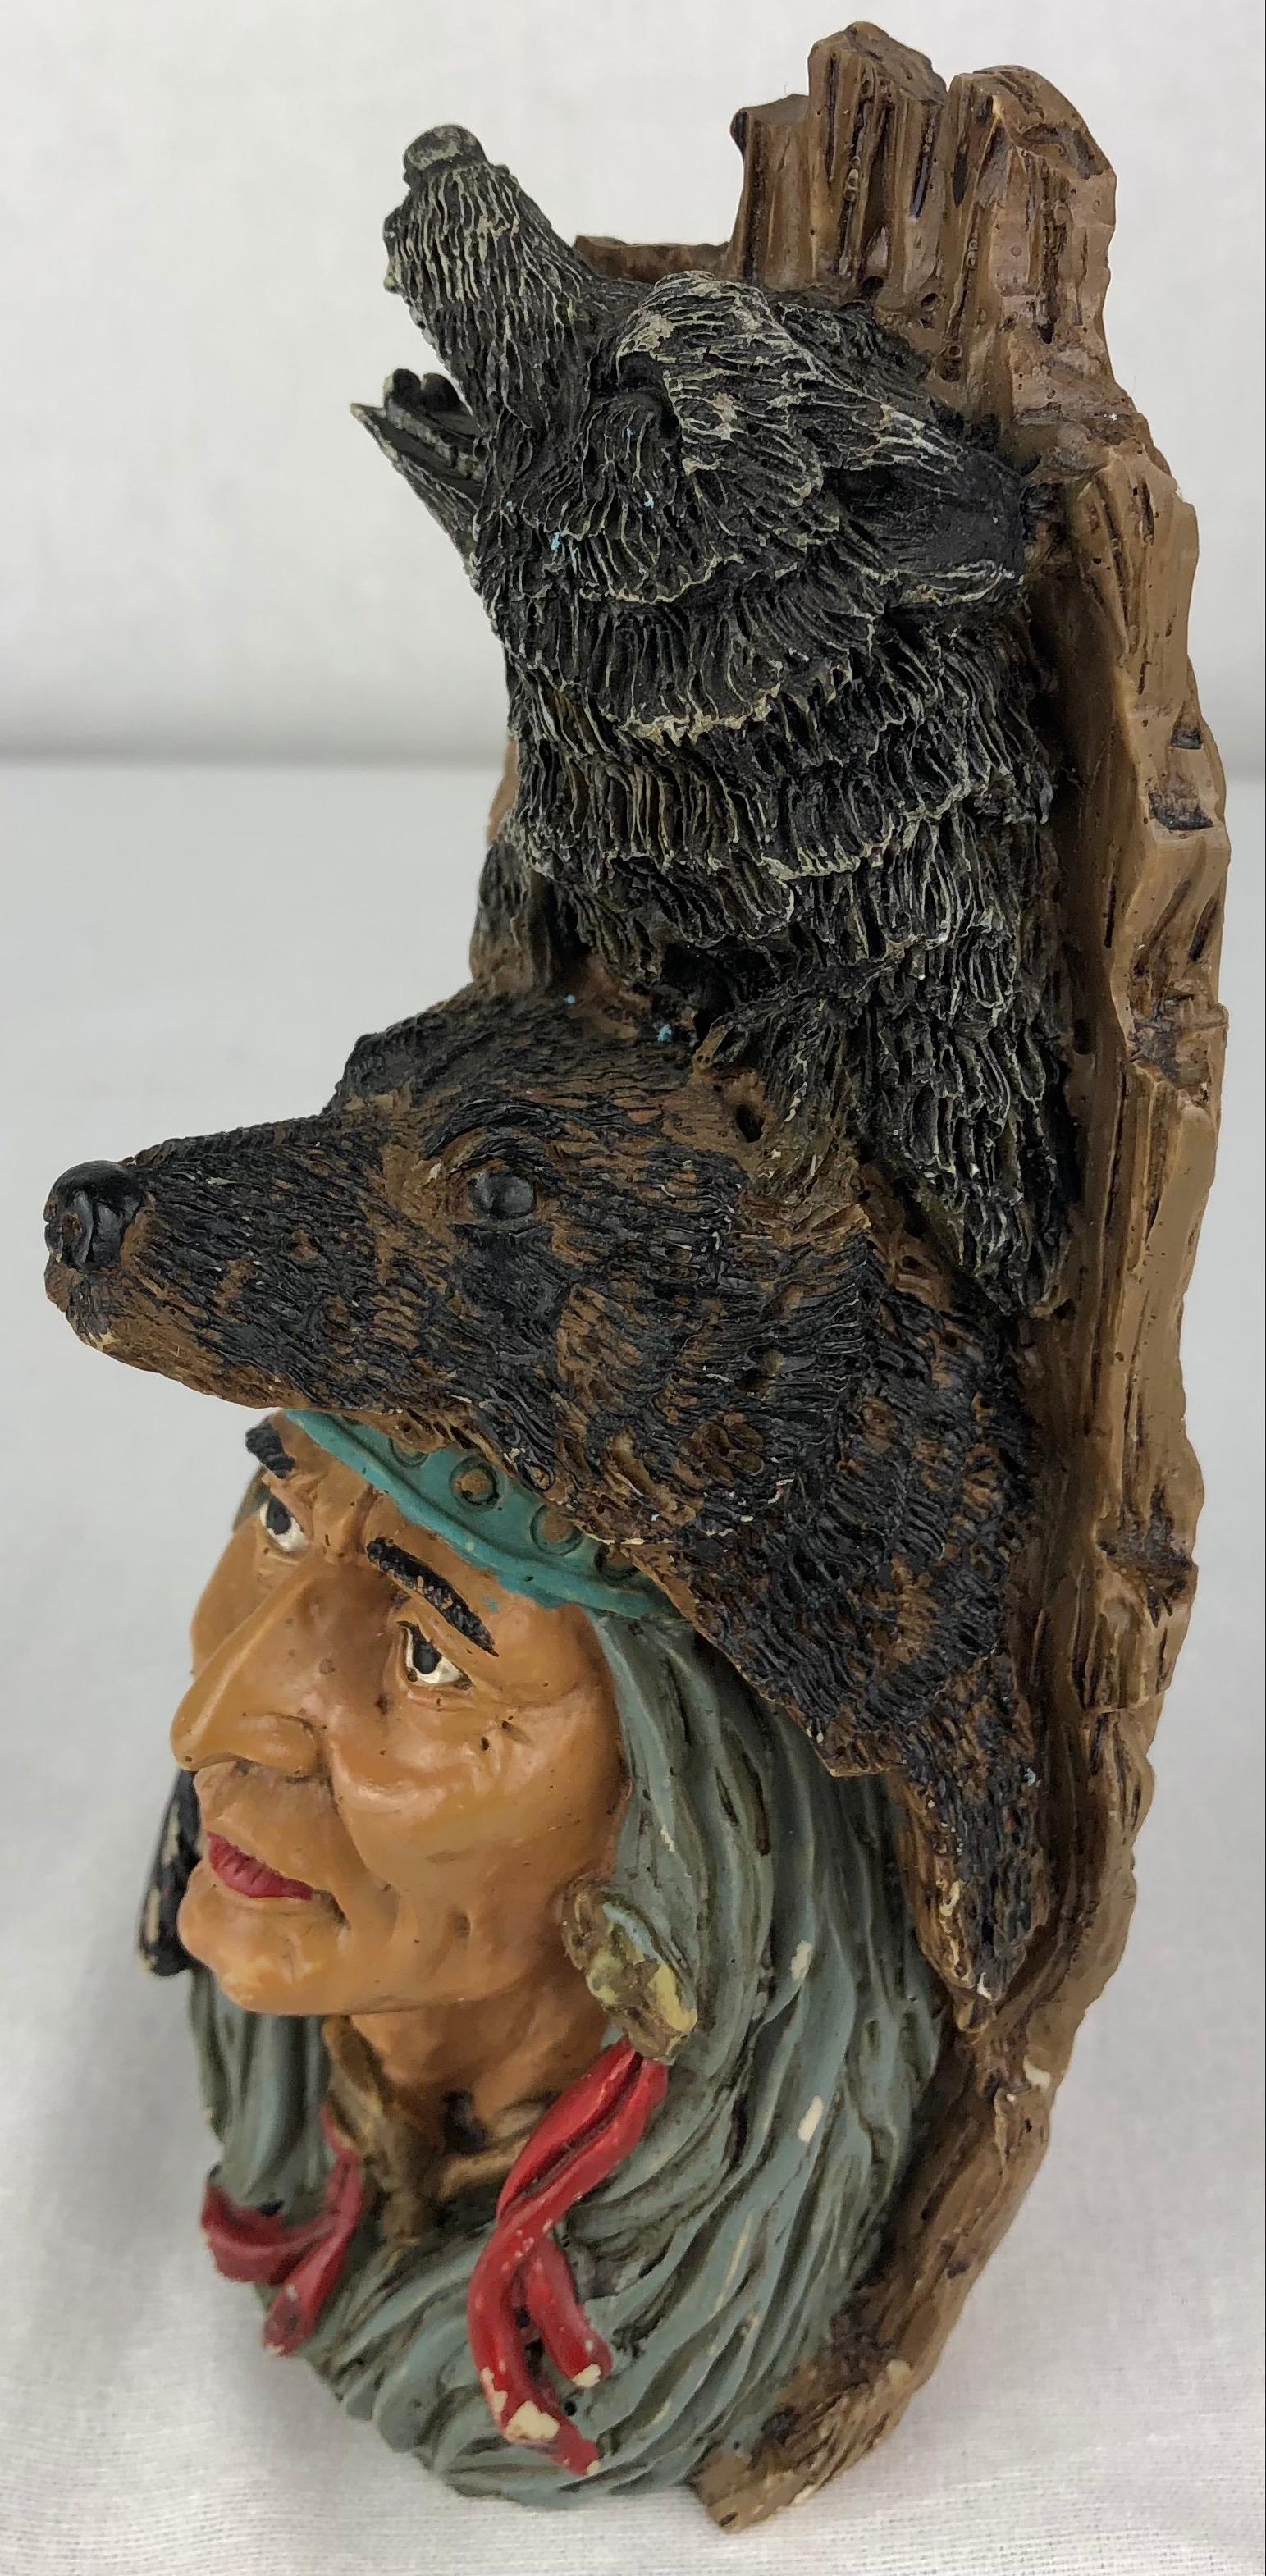 Artfully crafted and attributed to Universal Statuary Corp. this collectible Native American Indian statue will look great in any western setting or as an educational tool, circa 1966 like another we have for sale although this one is unmarked.